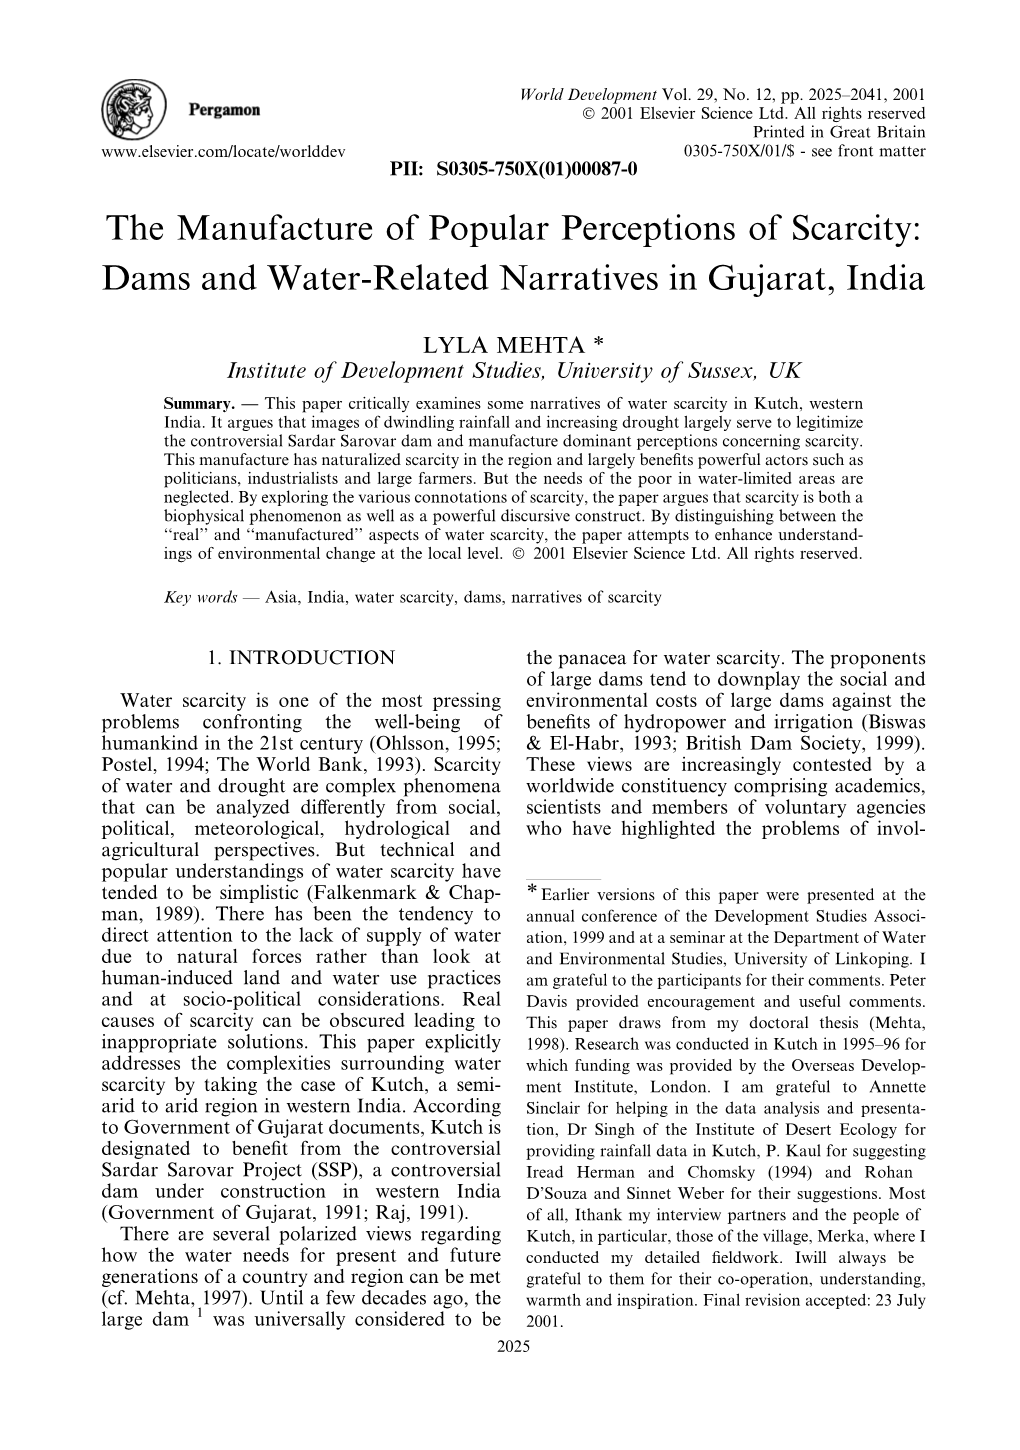 Dams and Water-Related Narratives in Gujarat, India